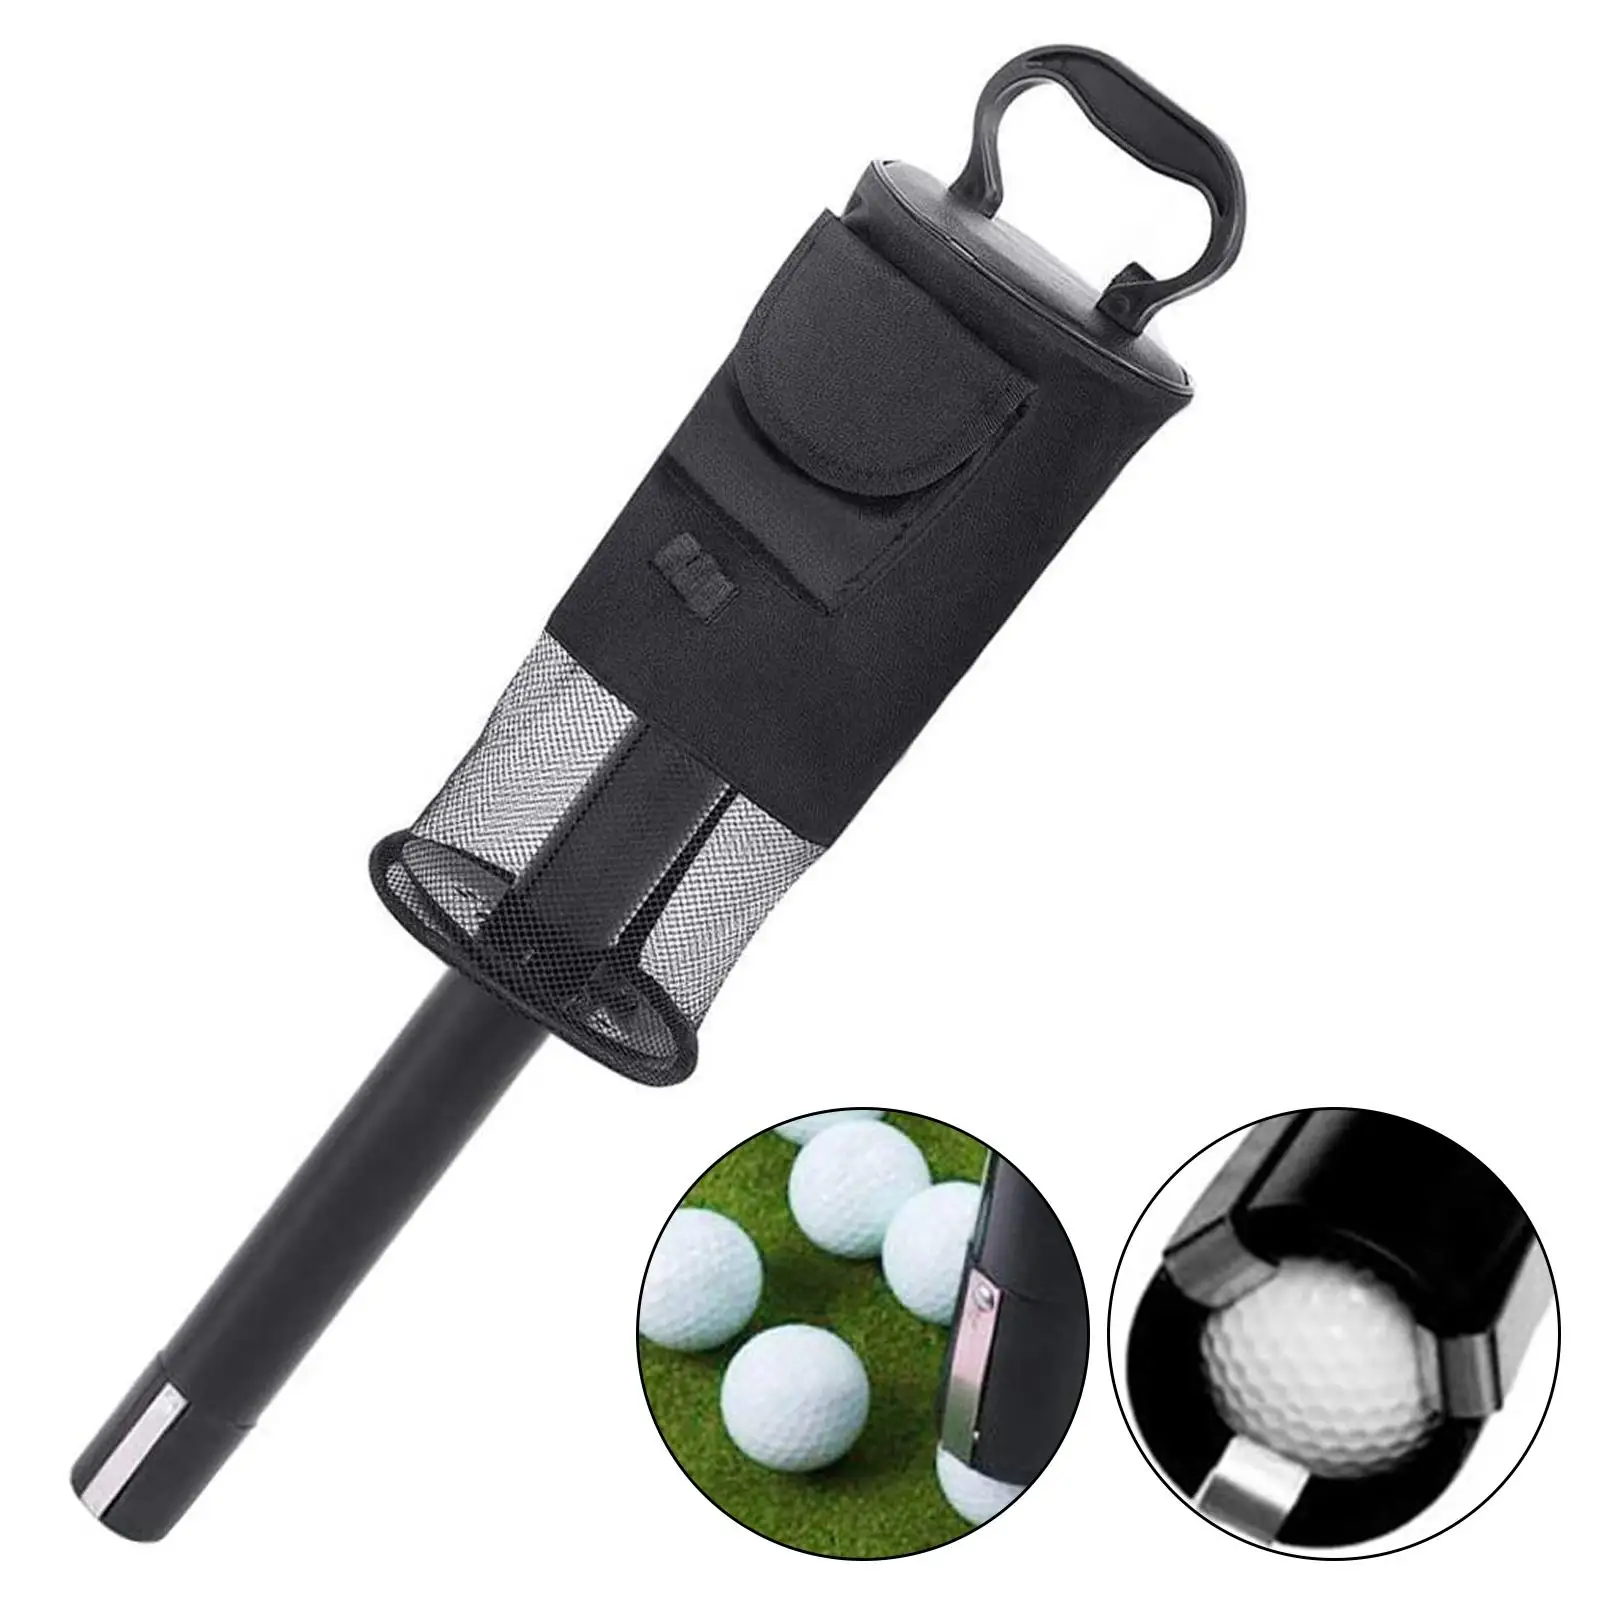 

Golf Ball Retriever Bag Golfing Equipment Hold up to 70 Balls Ball Picker Golf Shag Bags with Pocket and Tee Holder